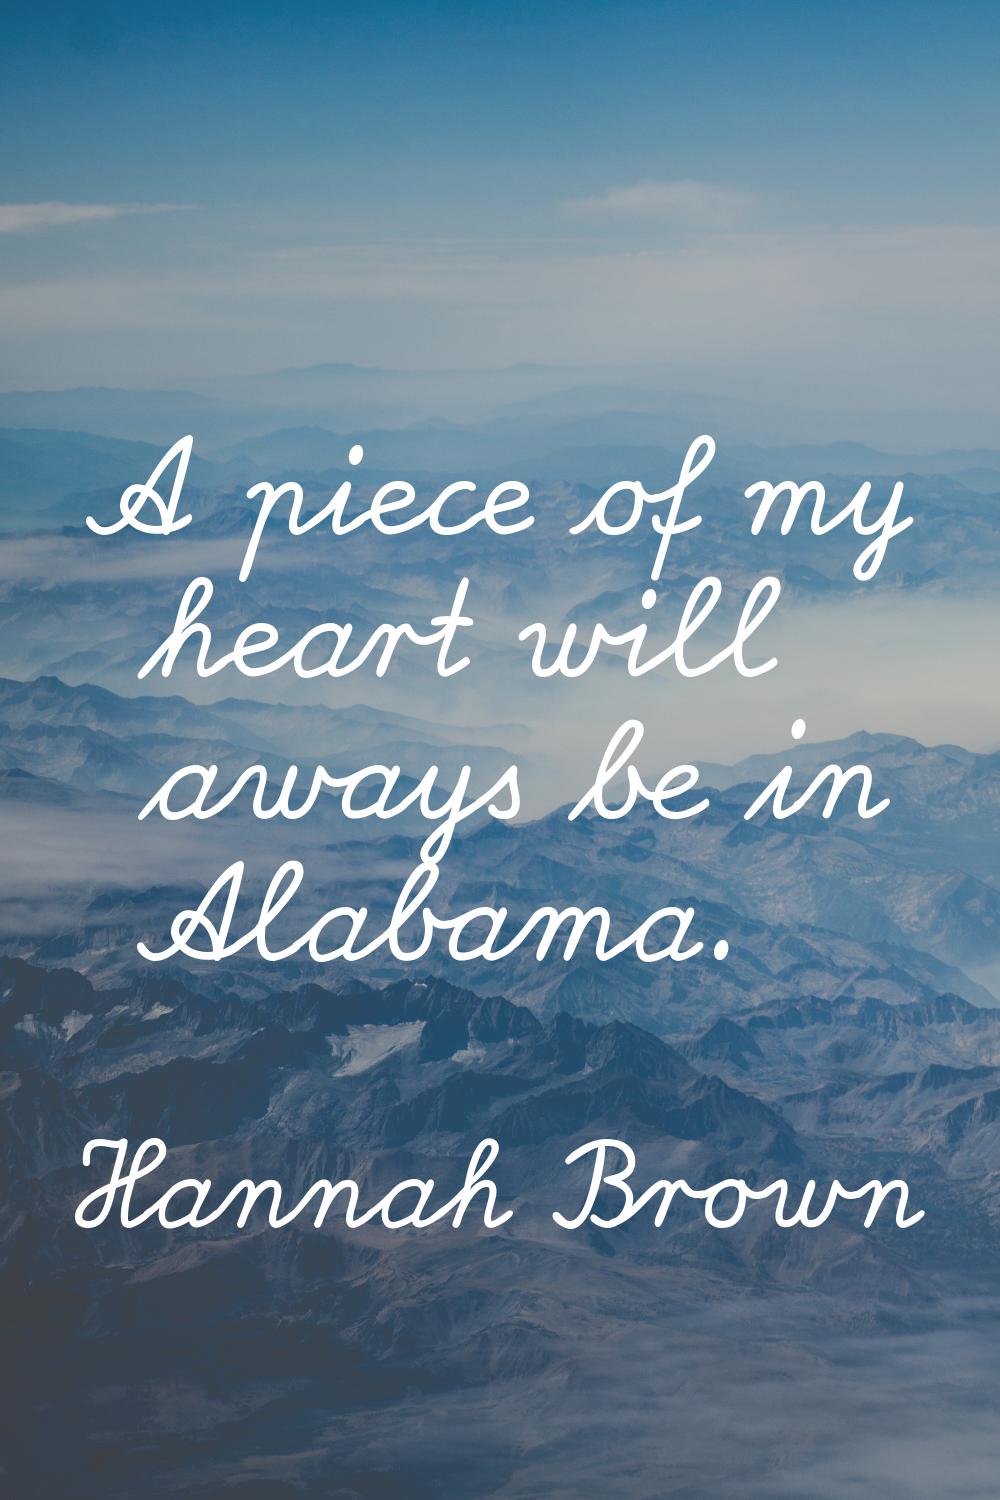 A piece of my heart will aways be in Alabama.